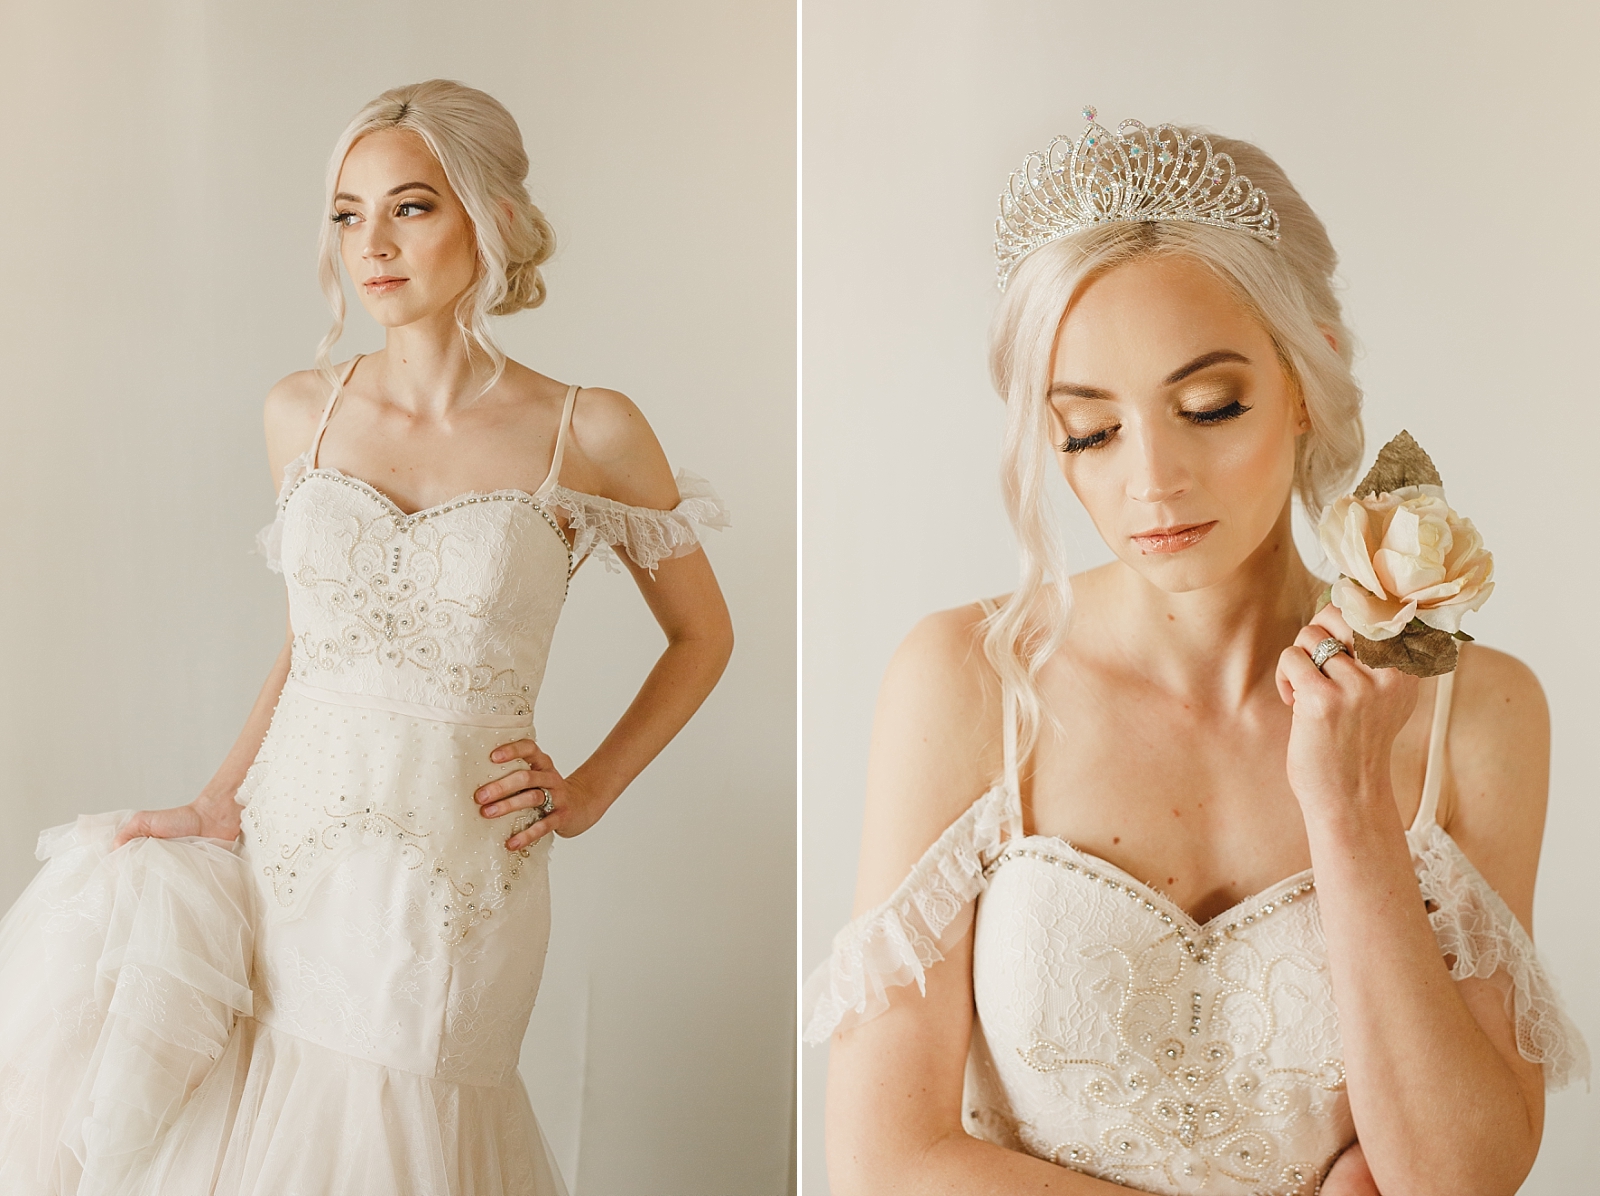 Fairytale inspired bridal accessories